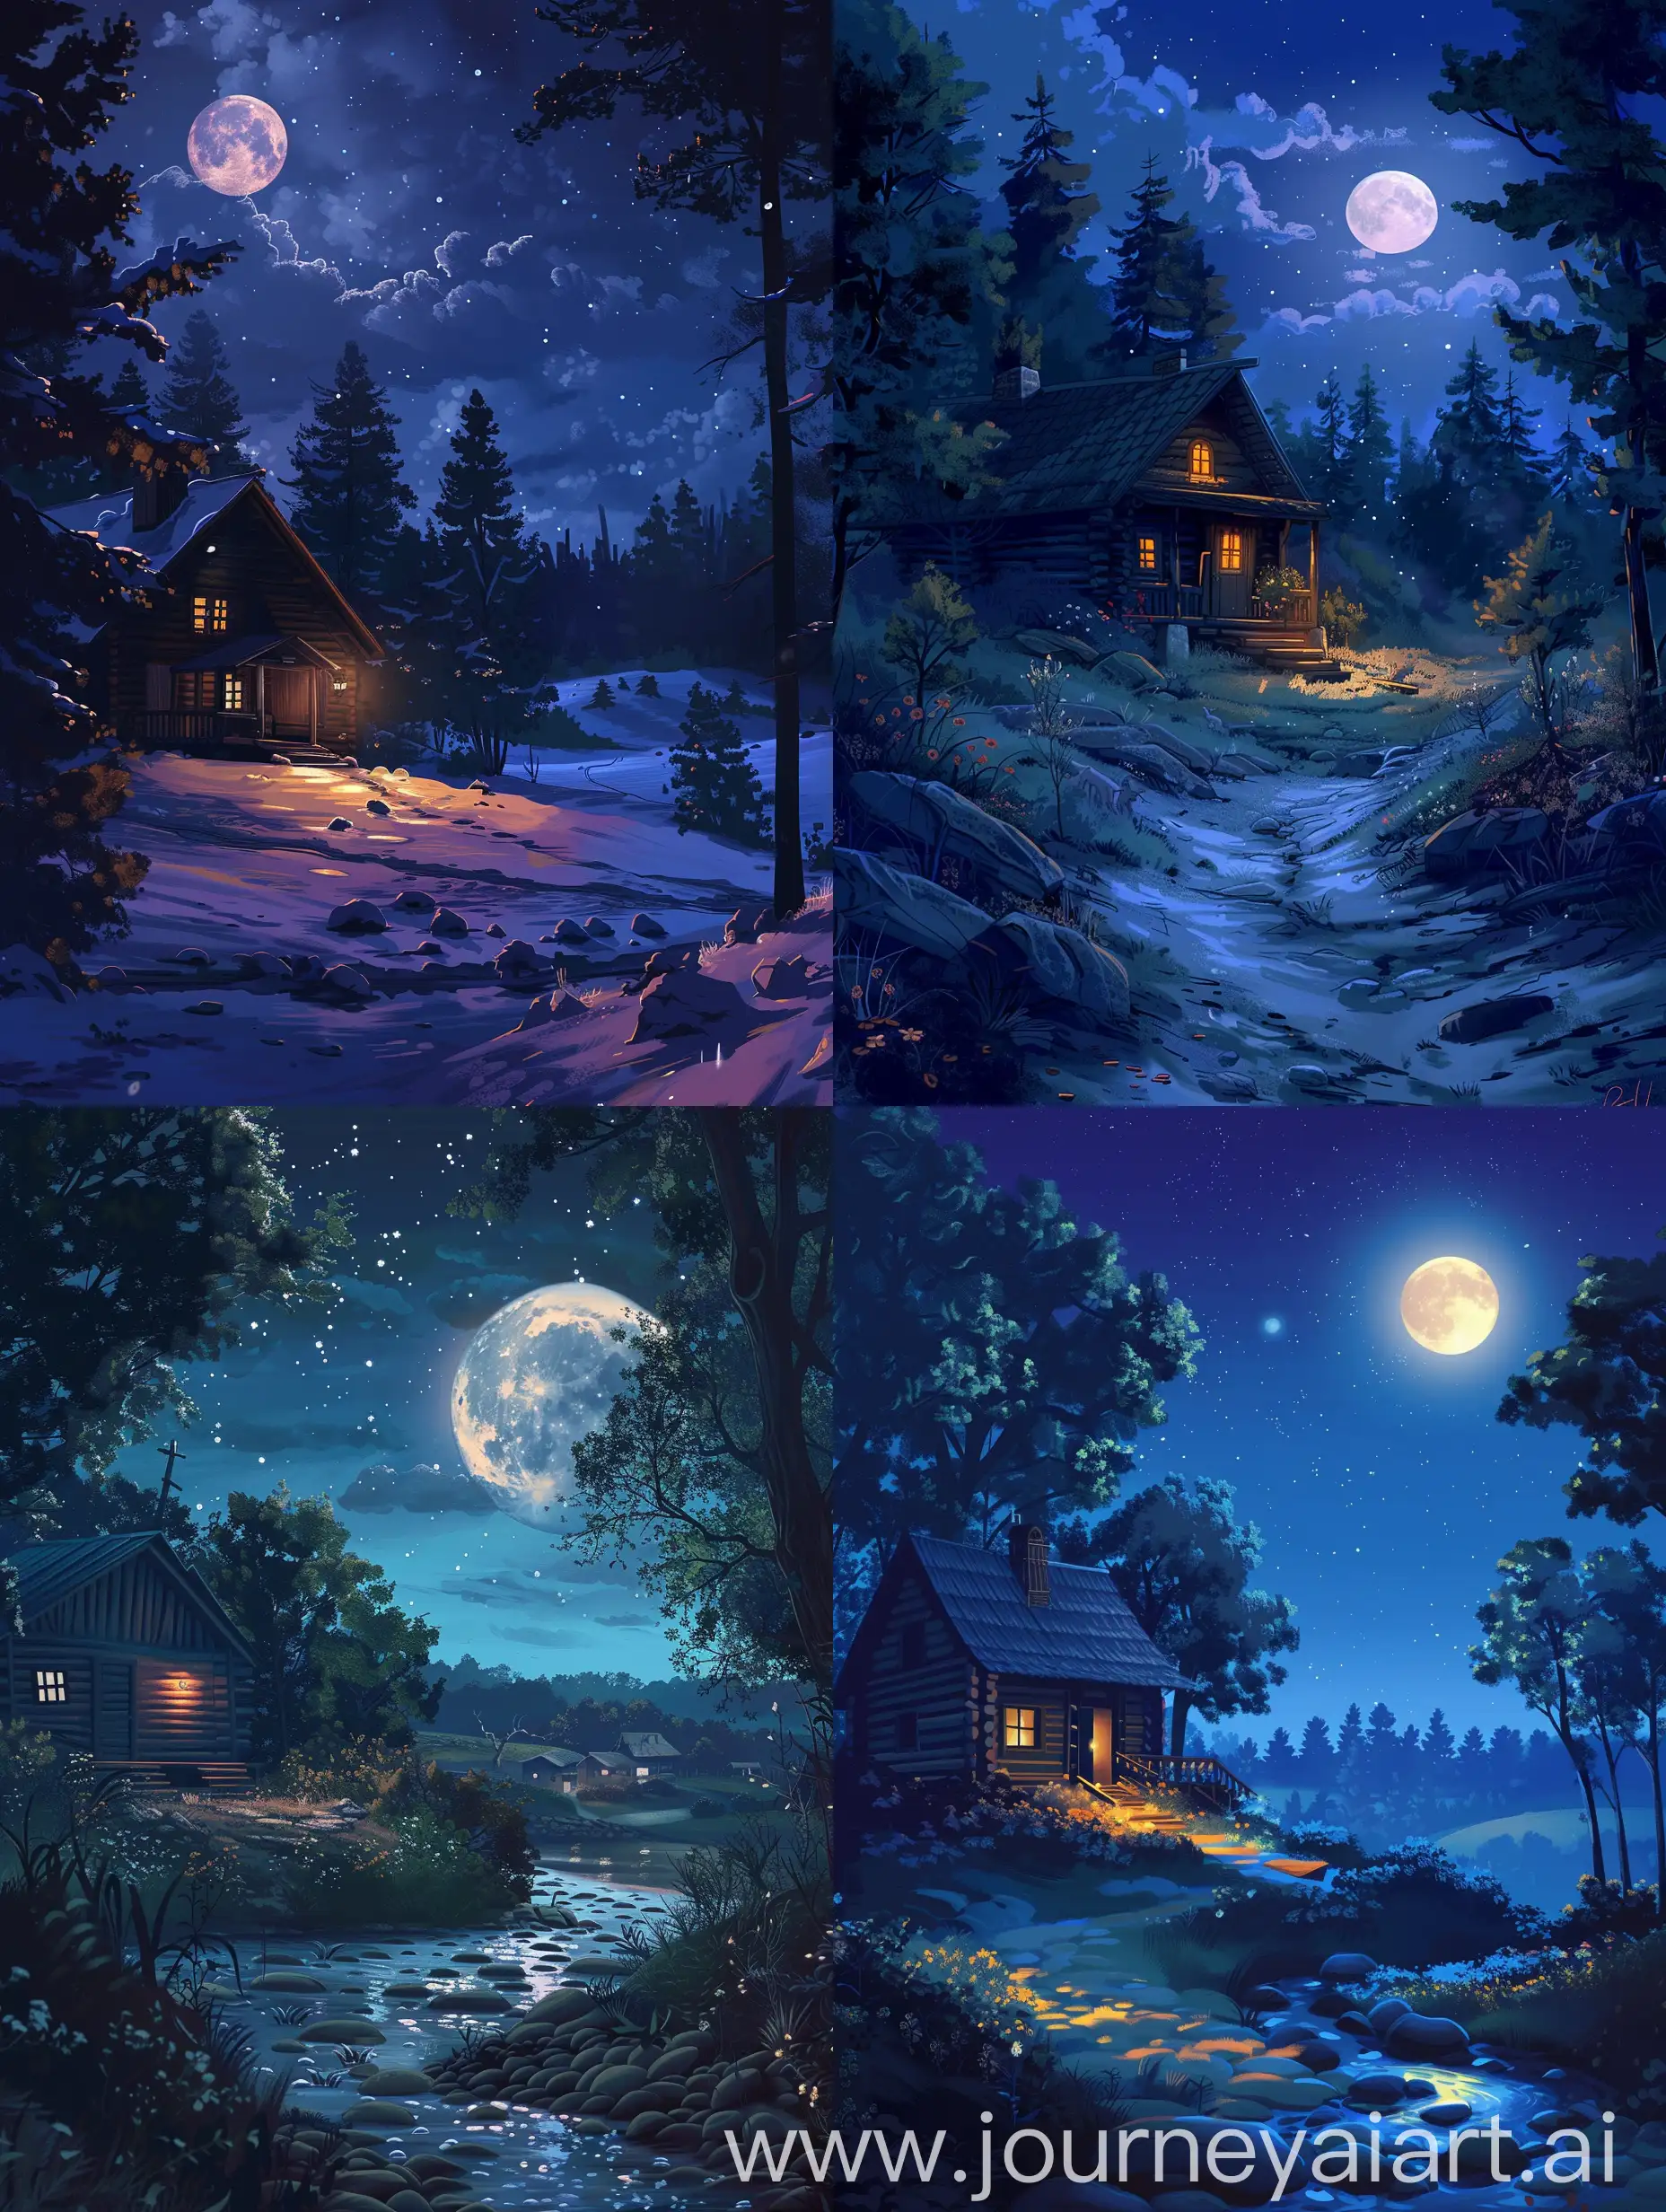 Moonlit-Night-Scene-of-a-Cabin-in-the-Woods